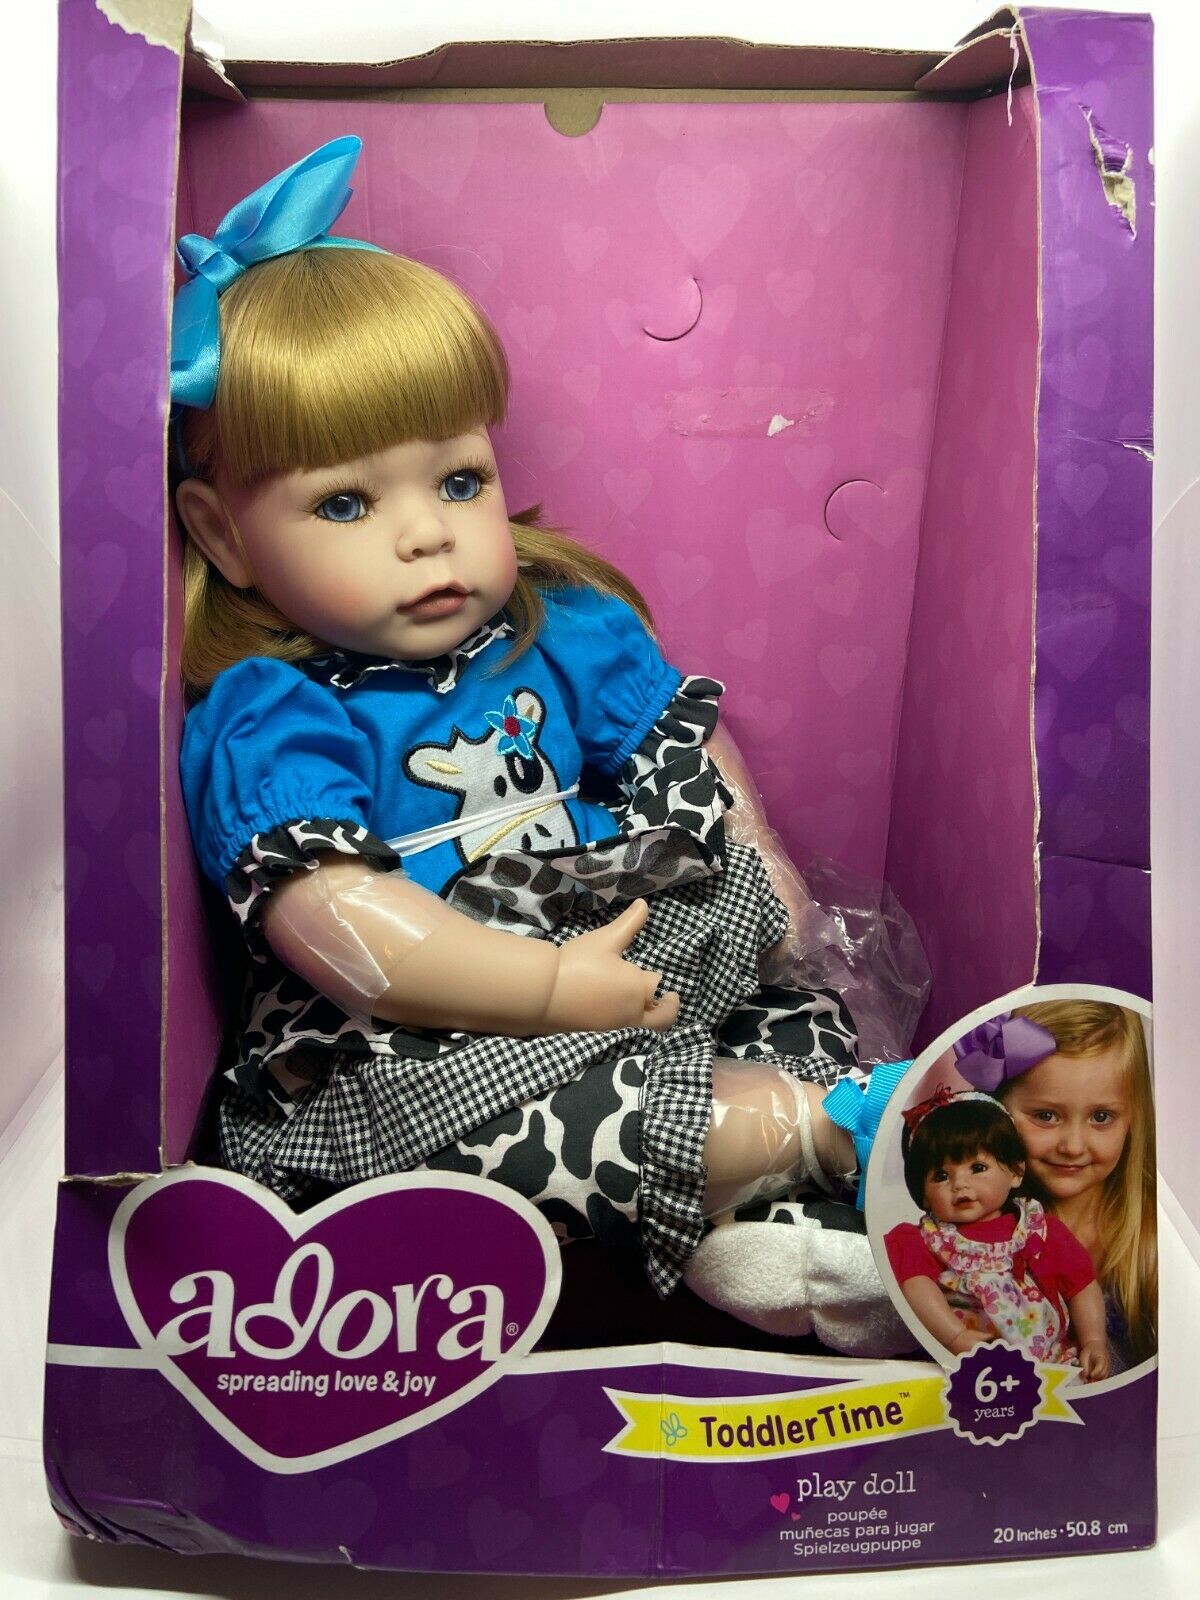 Adora Toddler Play Doll For With Cow Print Outfit Size 20 In (50.8 Cm)